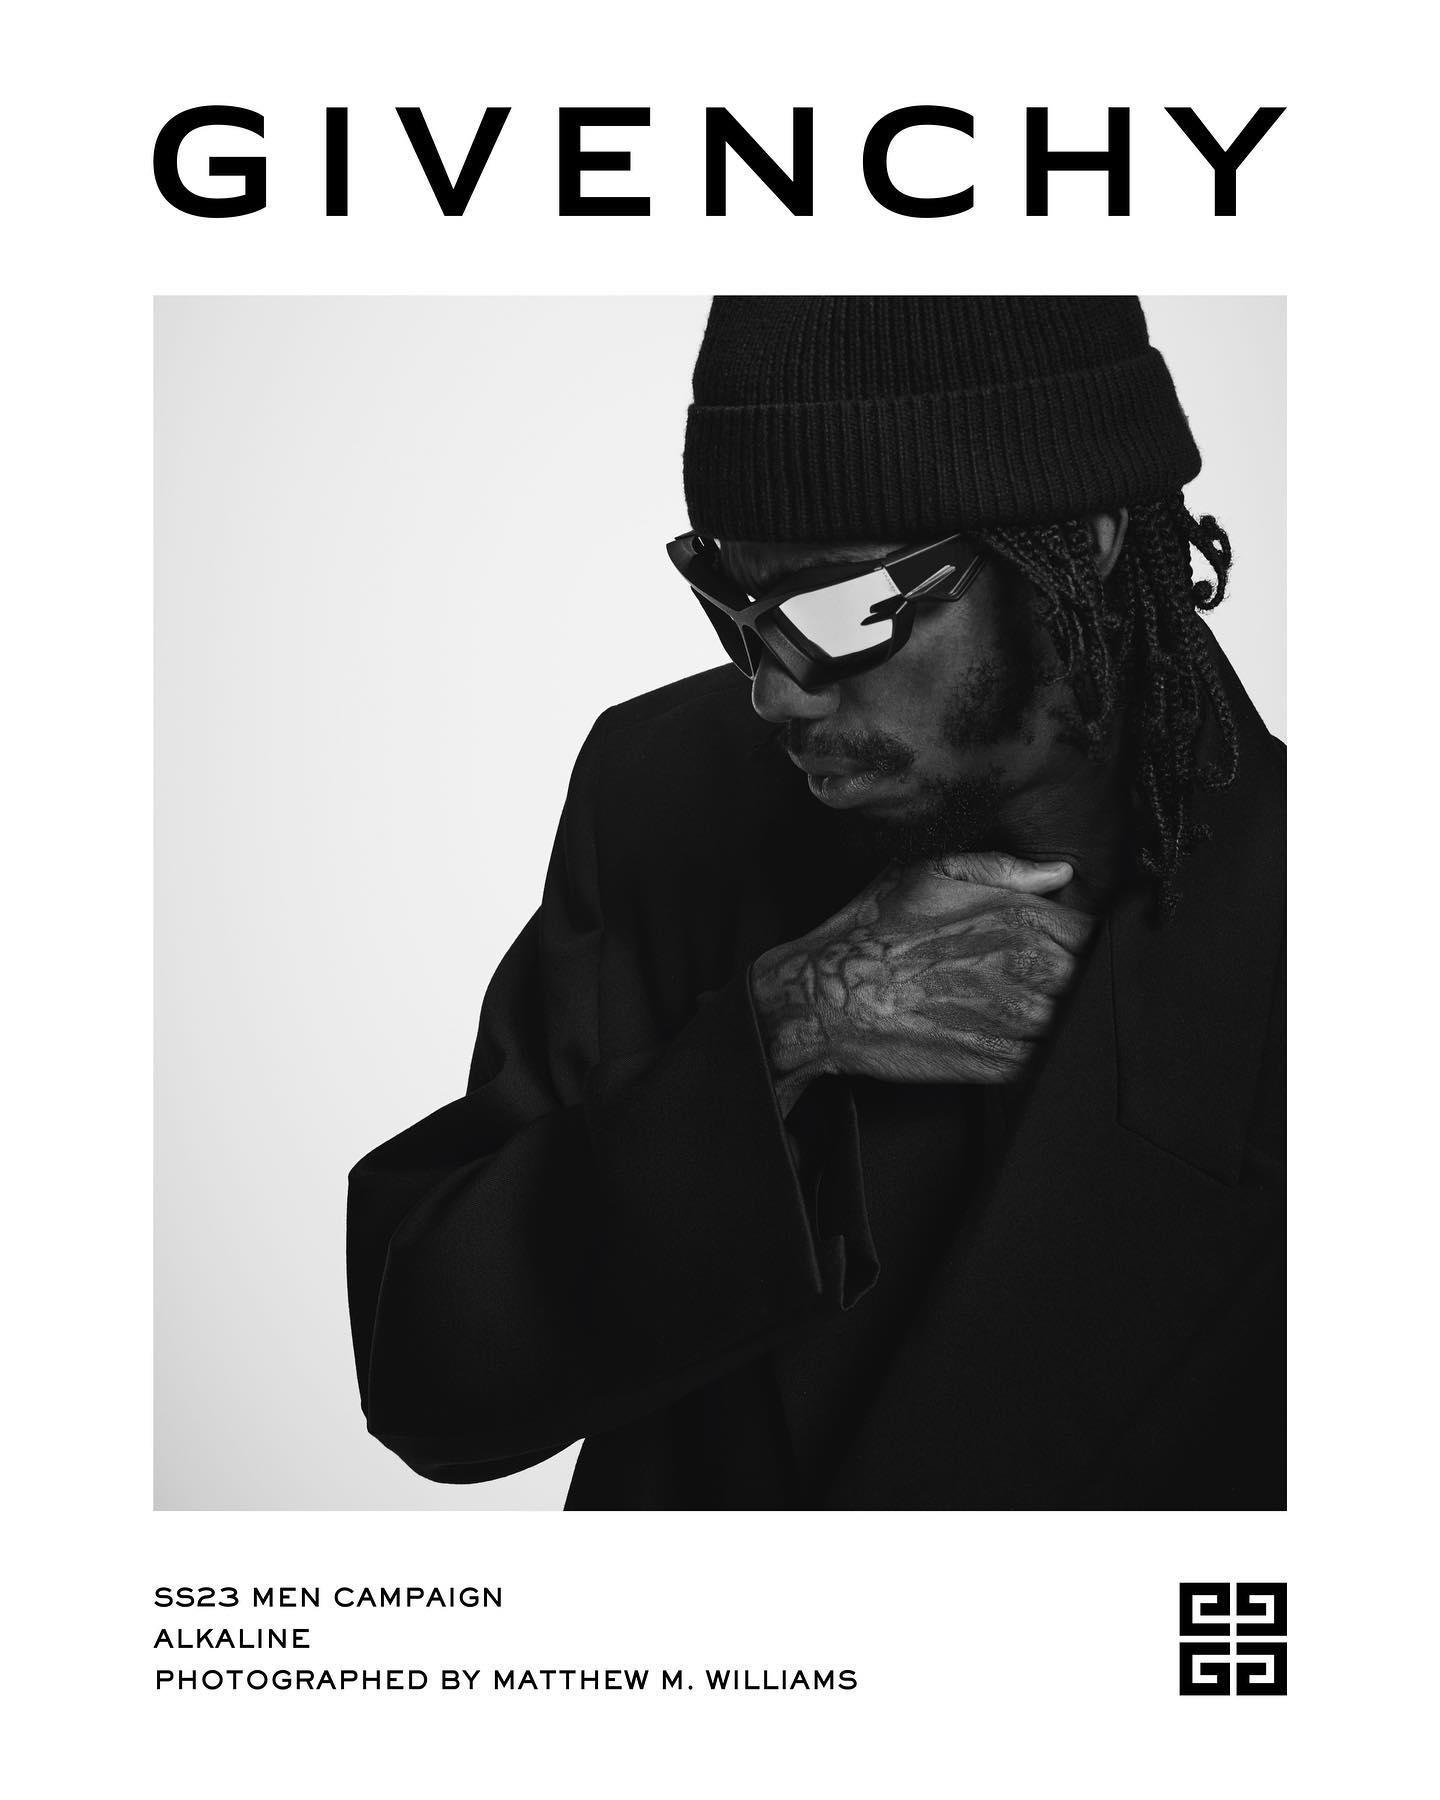 GIVENCHY - the #givenchyss23 men's global campaign by #matthewmwilliams featuring #manhimselff